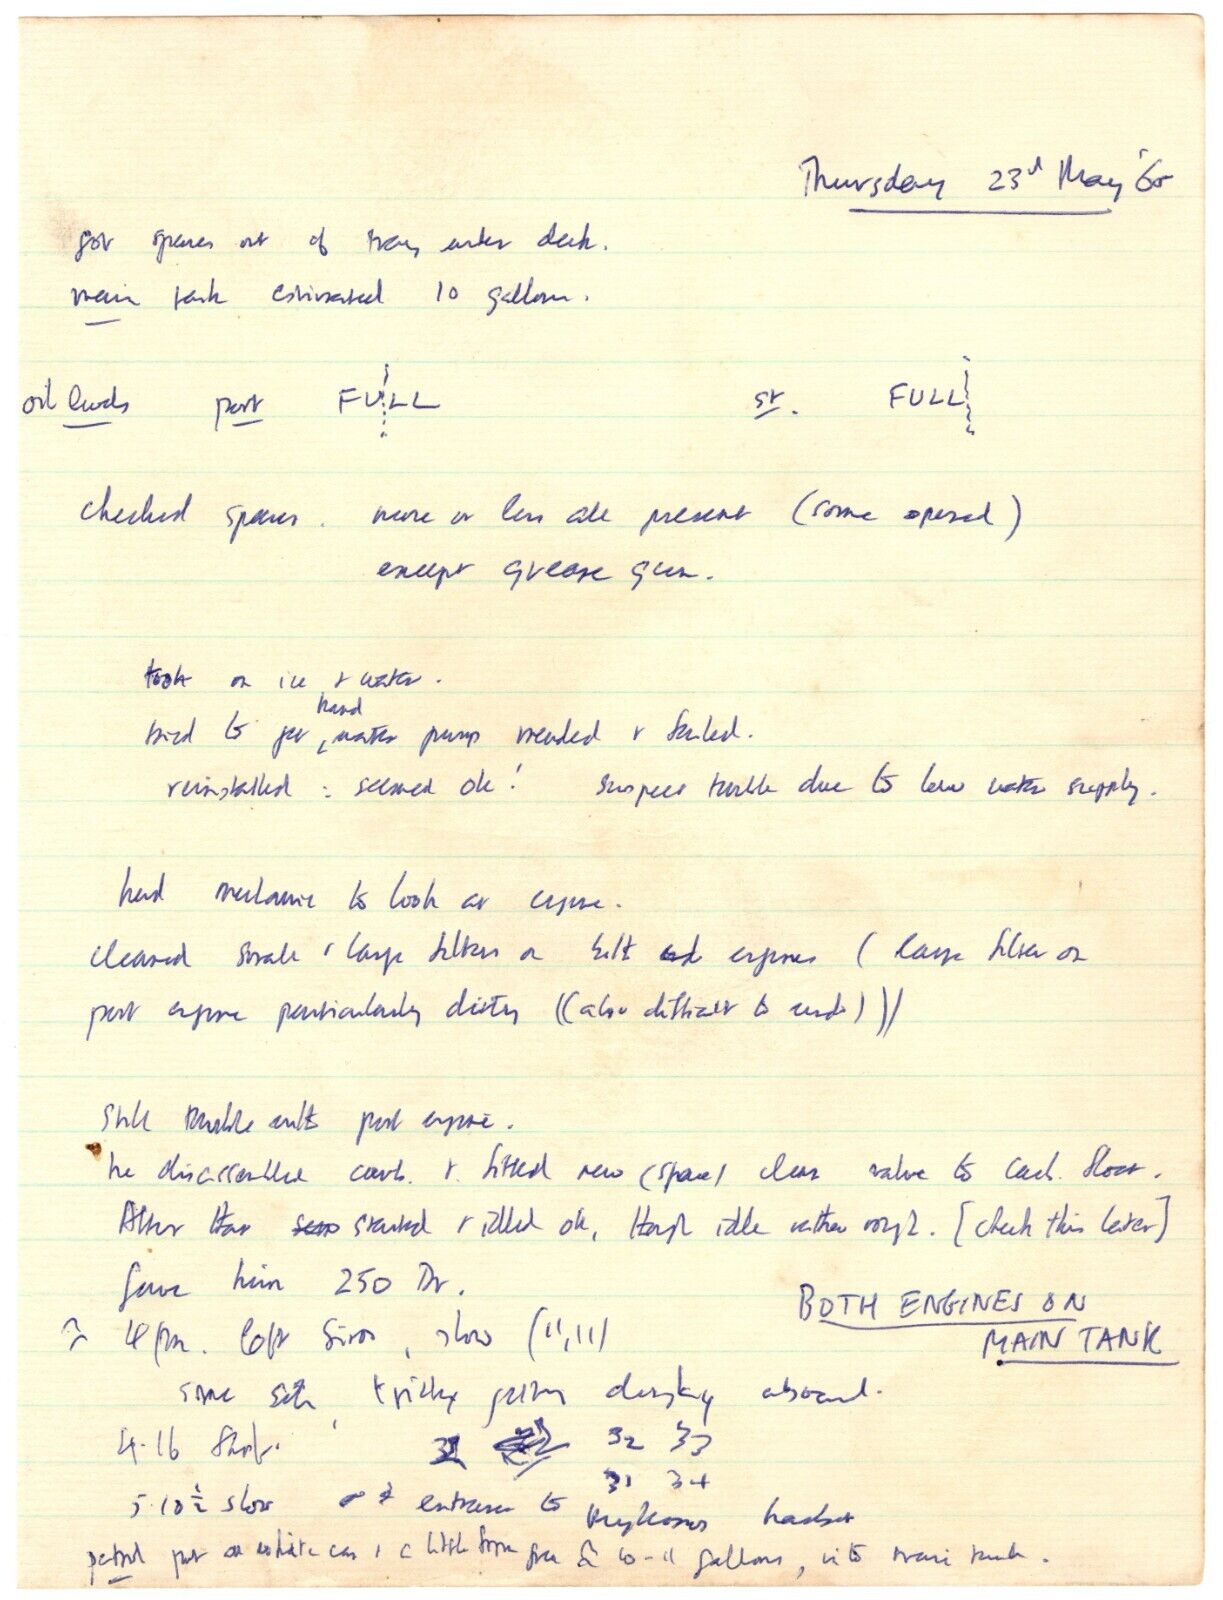 Autograph Manuscript Handwritten by Francis Crick - Nearly 175 Words in His Hand